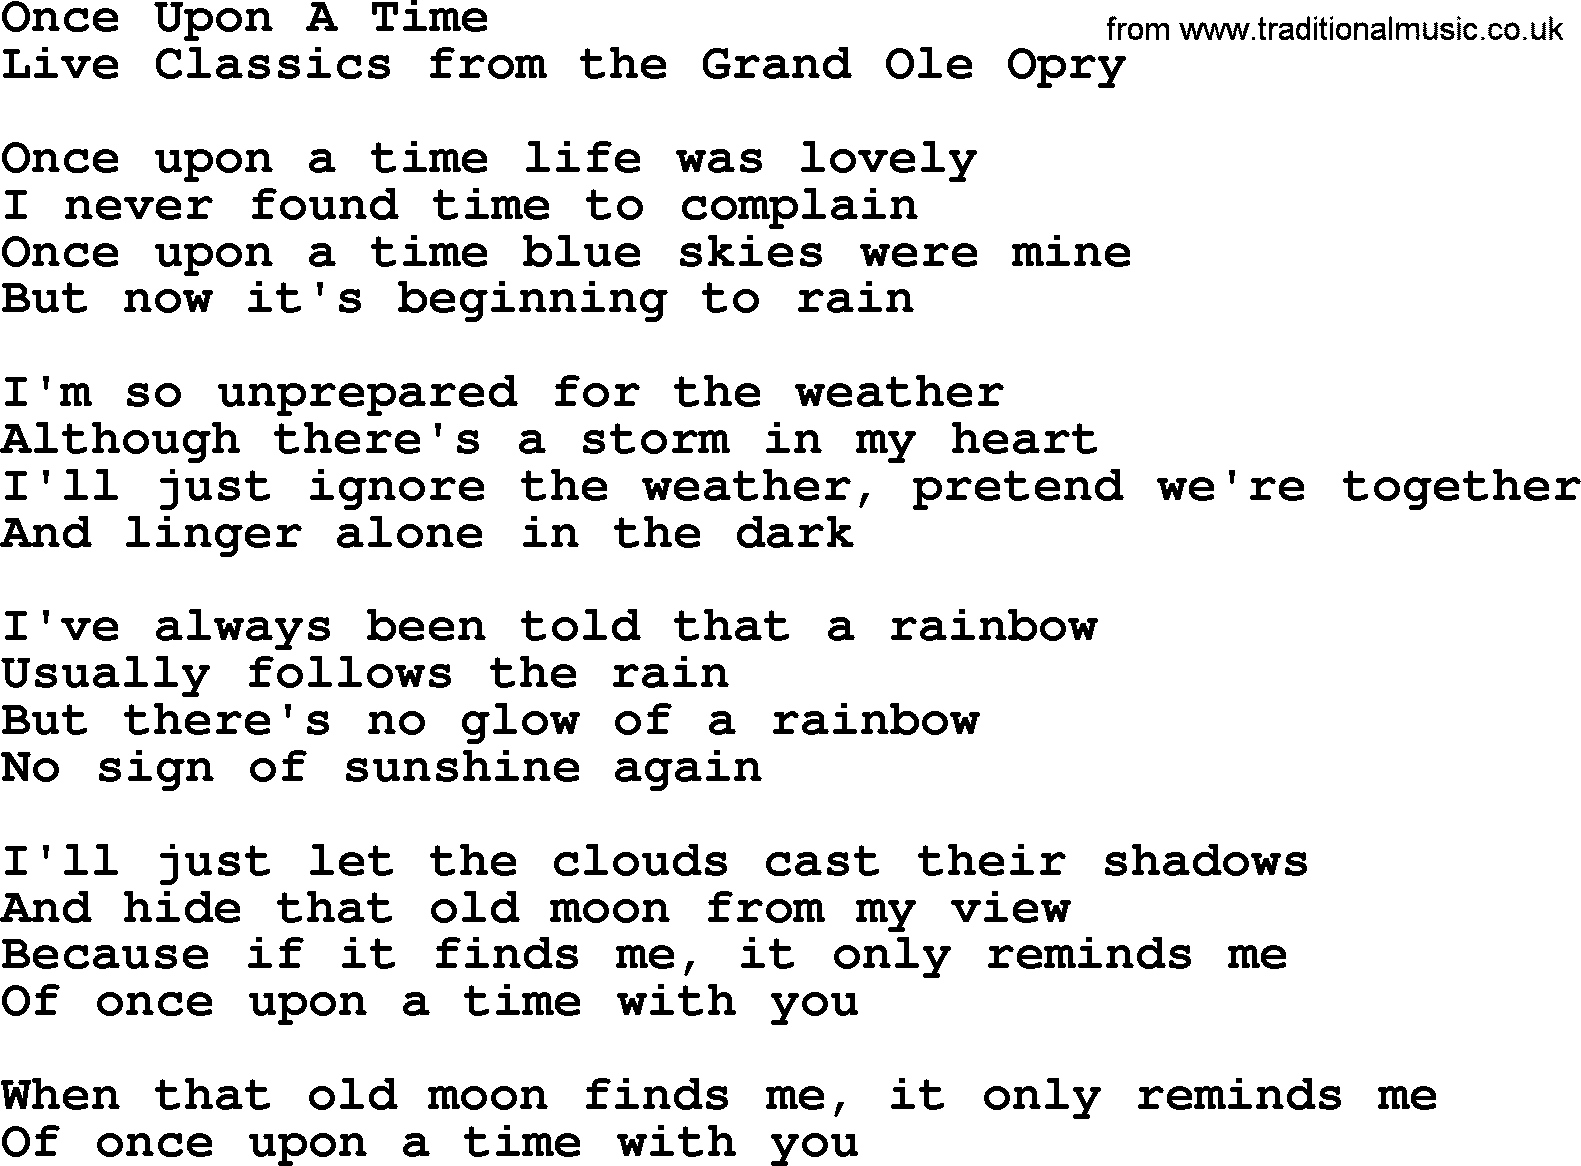 Once Upon A Time, by Marty Robbins - lyrics